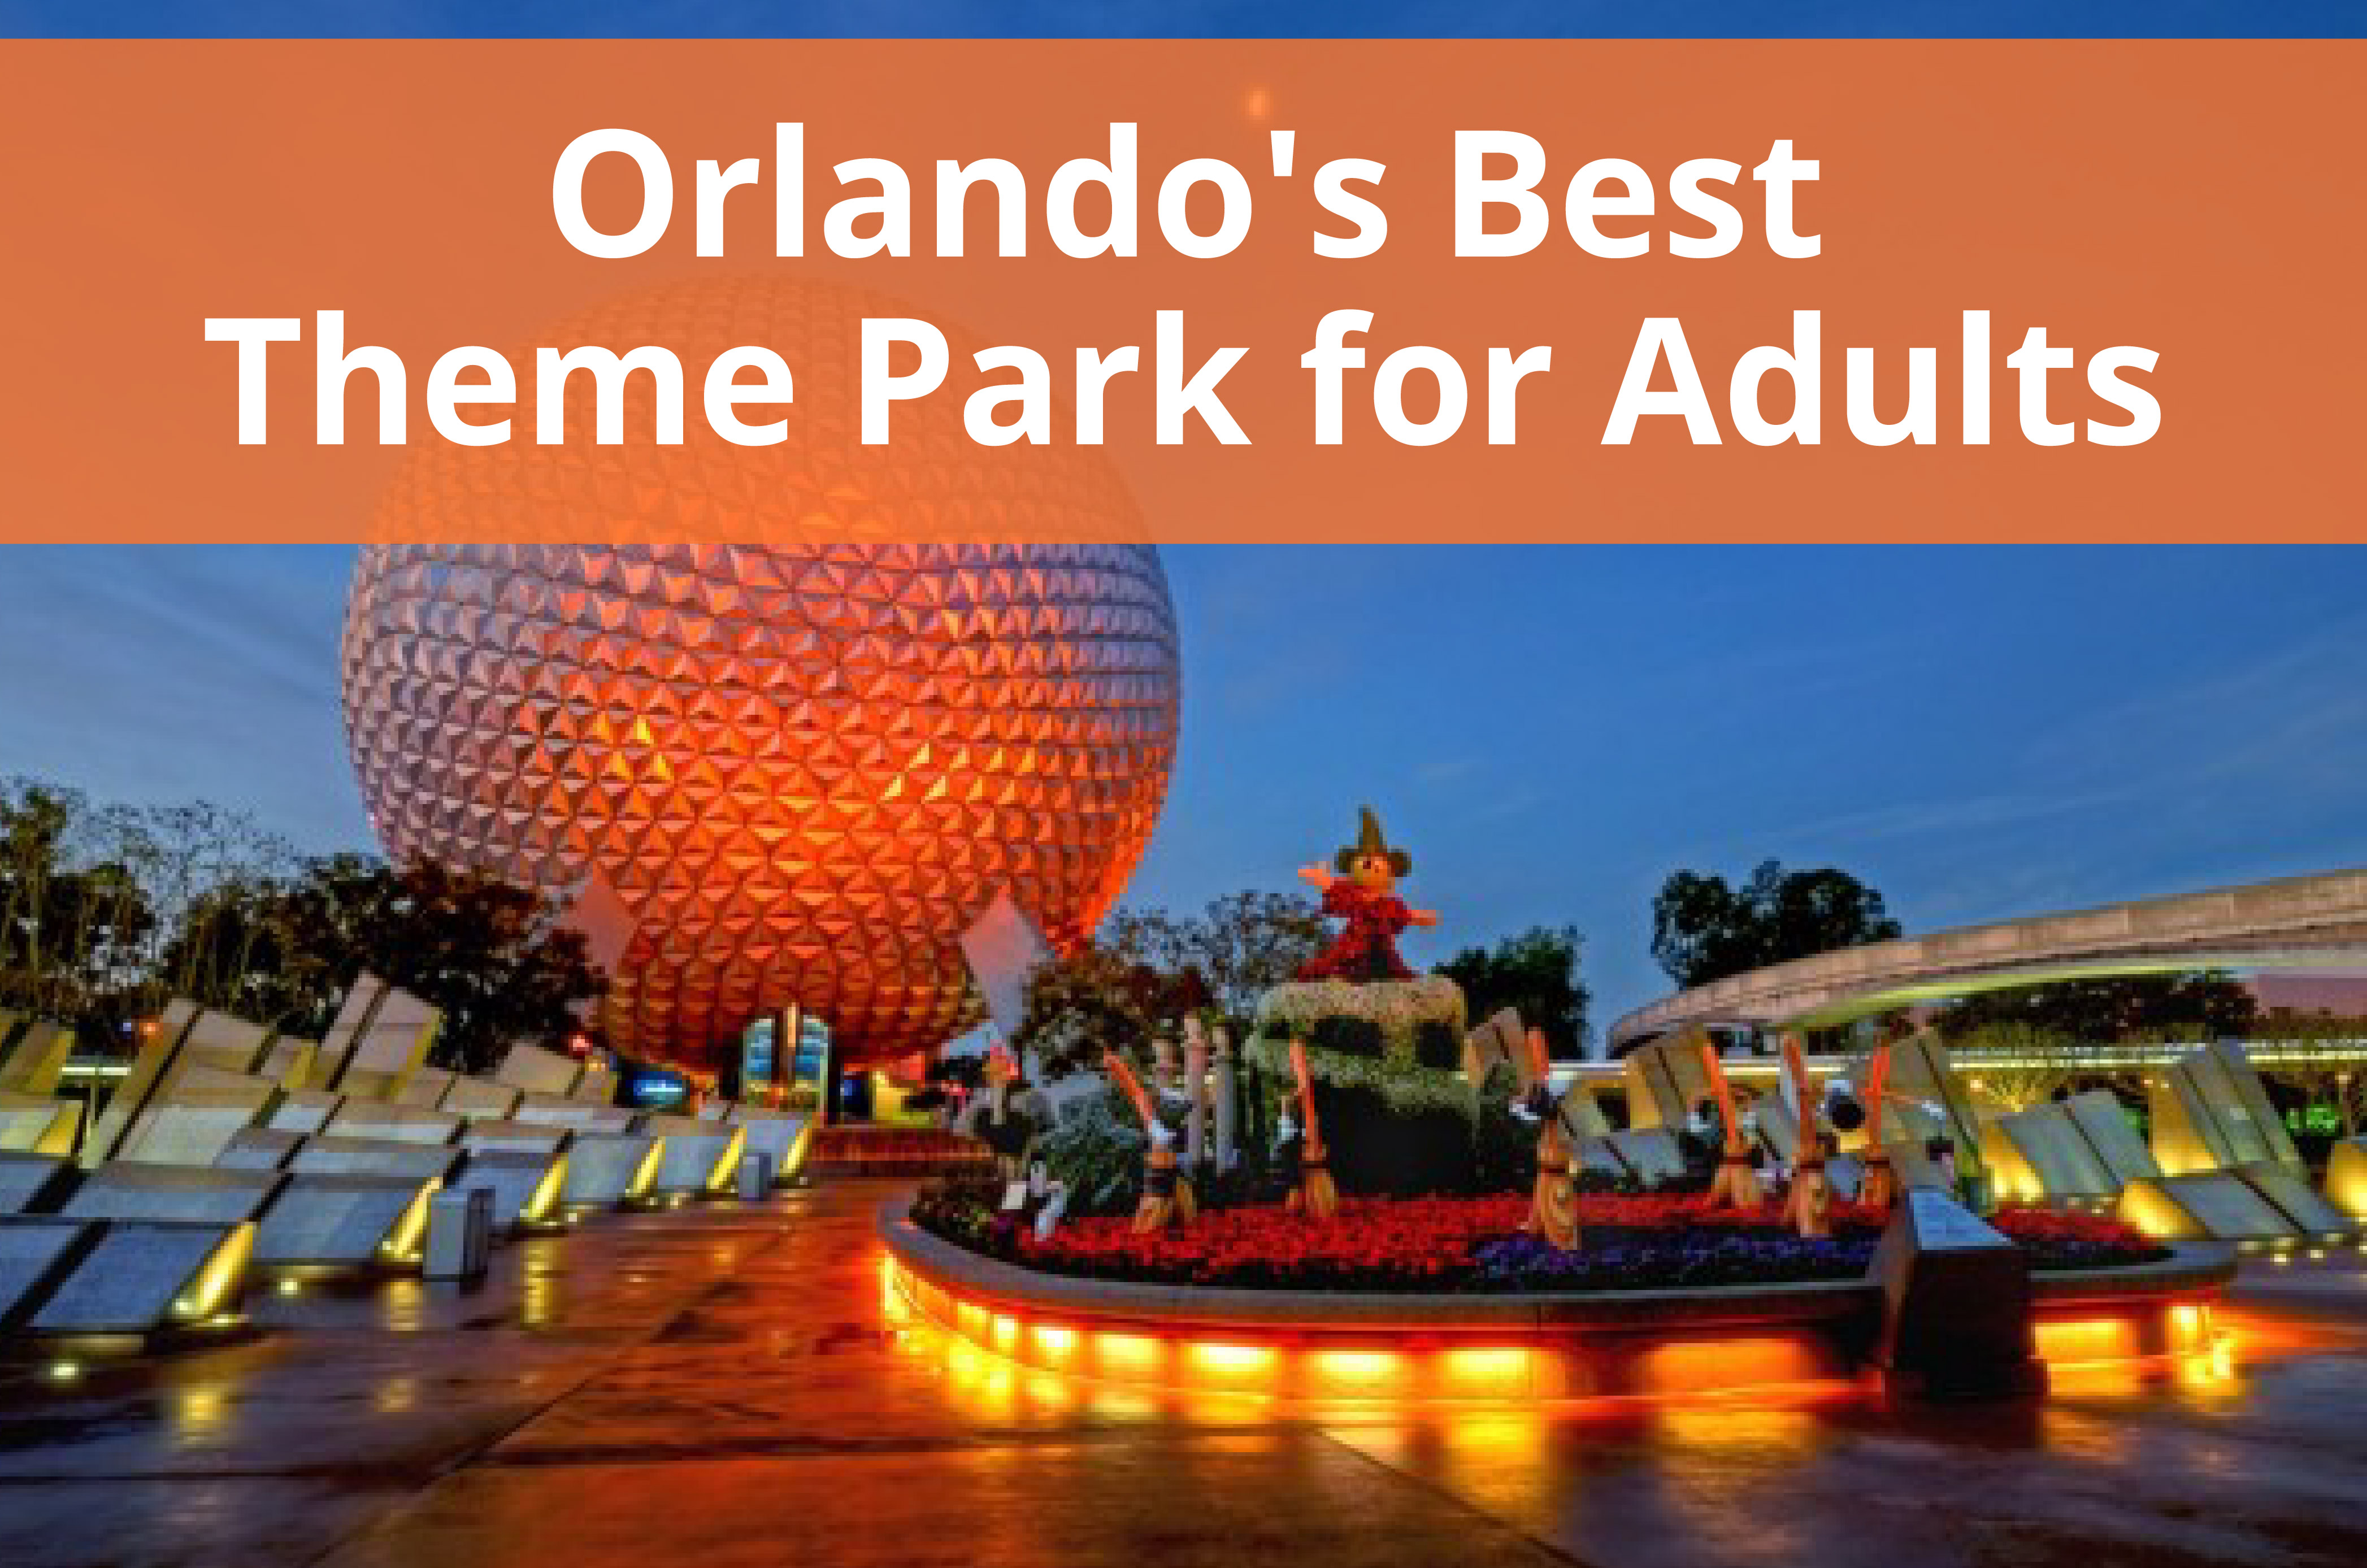 Orlando's Best Theme Park for Adults - staySky suites I-Drive Orlando